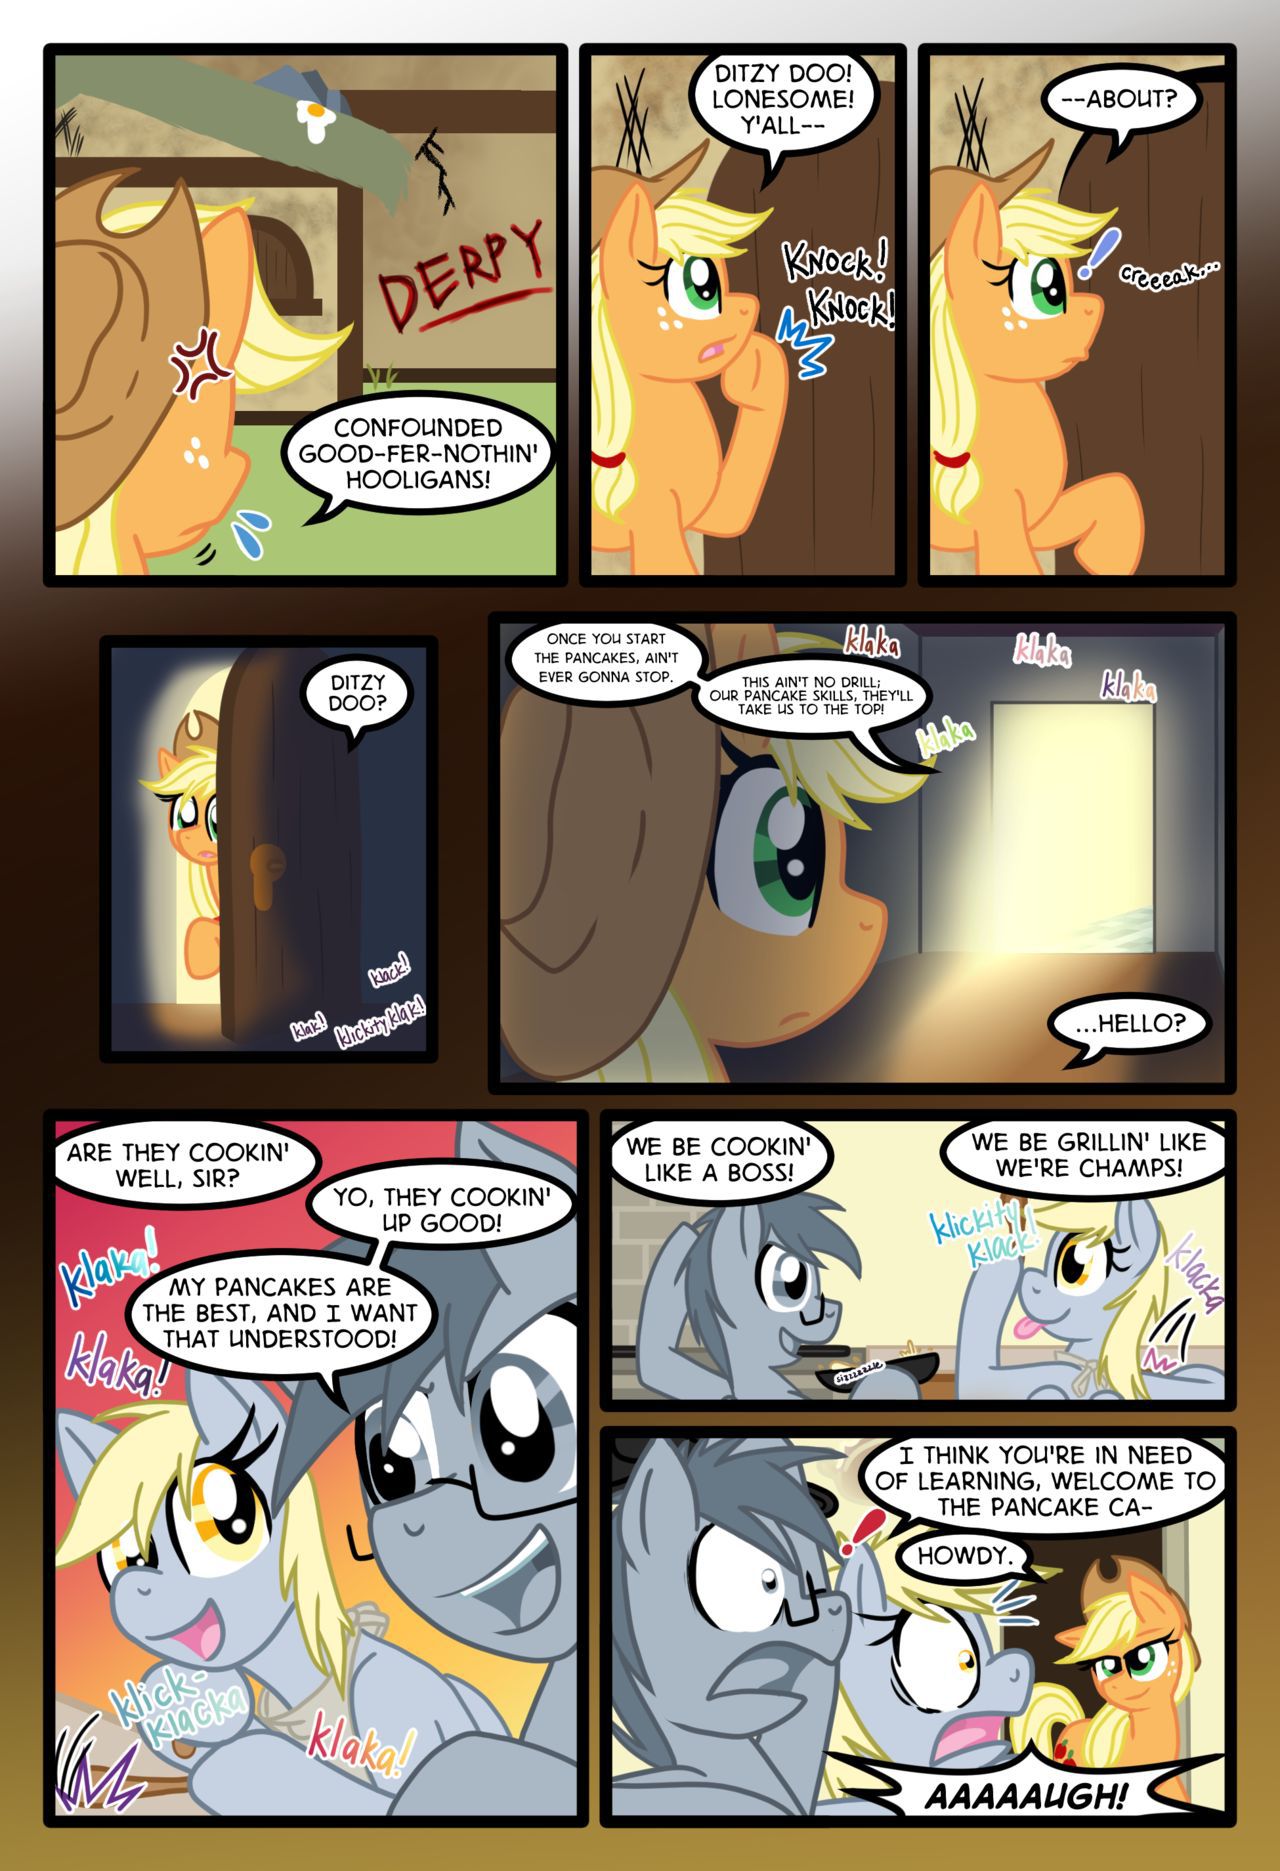 [Zaron] Lonely Hooves (My Little Pony Friendship Is Magic) [Ongoing] 85